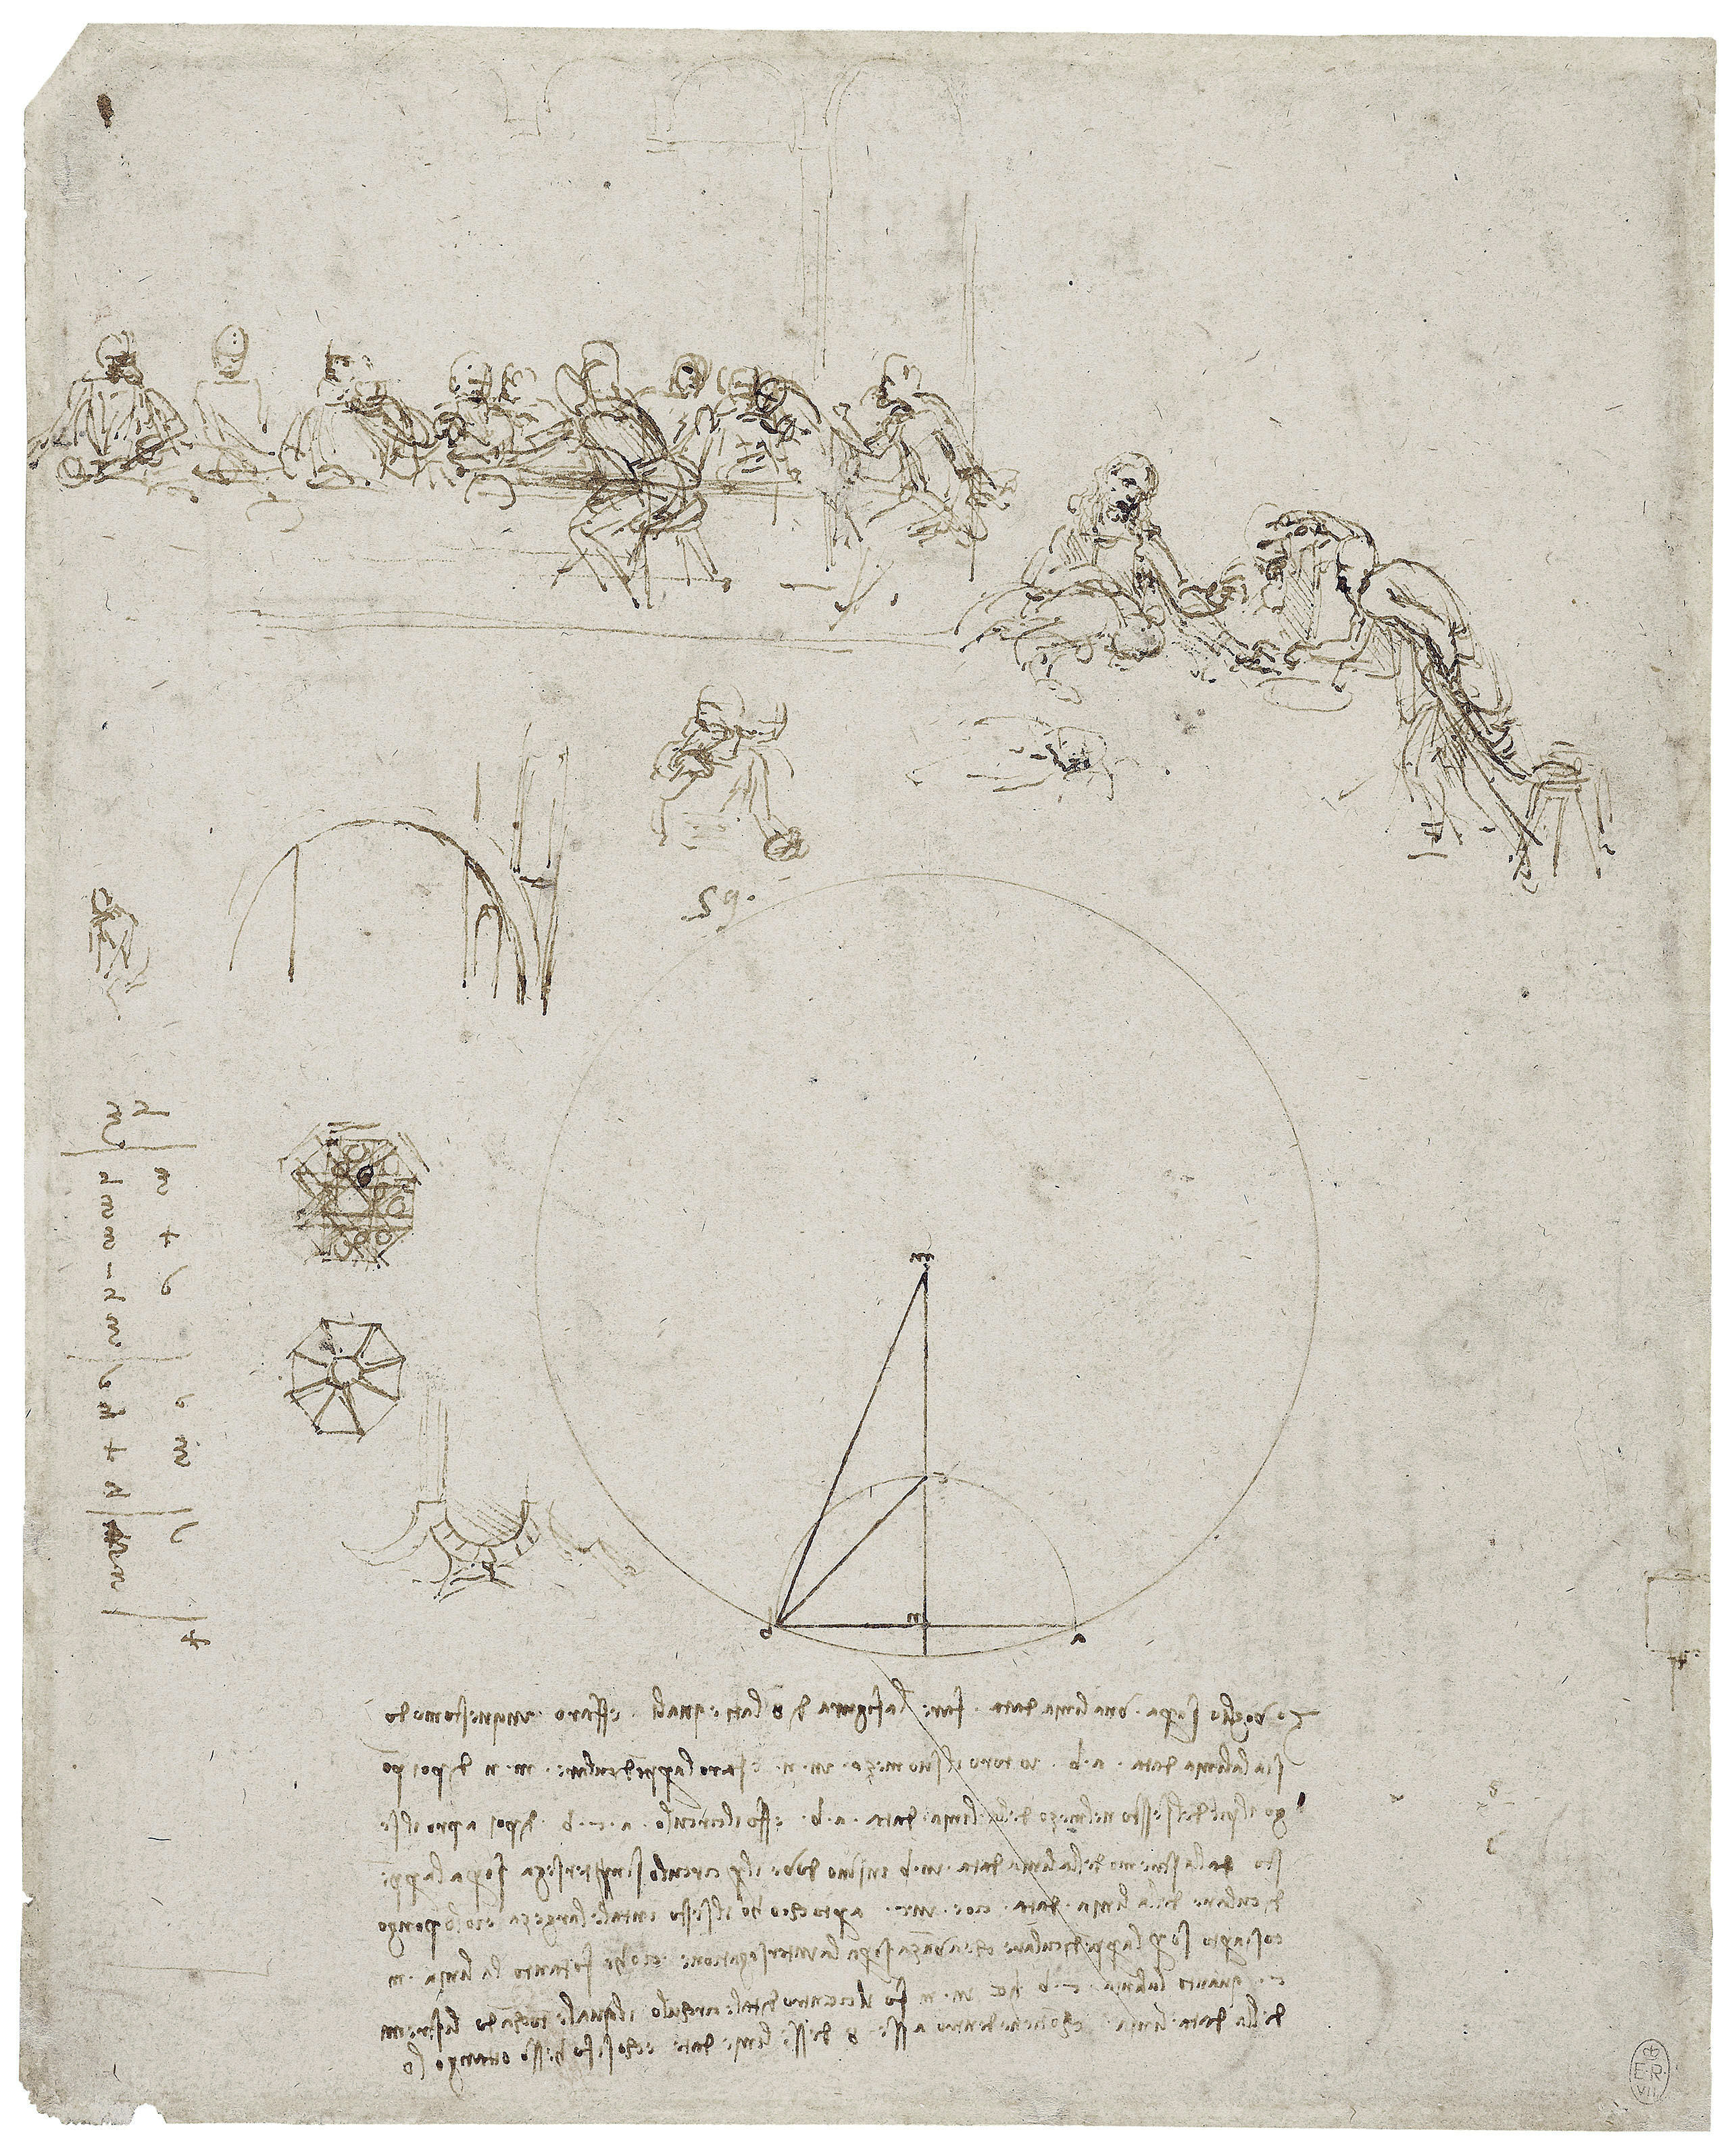 This undated handout provided by The Royal Collection Trust shows sketches for the Last Supper, and other studies by Leonardo da Vinci which forms part of the Royal Collection, at Windsor Castle in Windsor, England. The newly identified sketch will go on public display for the first time later this month in Leonardo da Vinci: A Life in Drawing at The Queen's Gallery, Buckingham Palace in London between May 24 - Oct. 13, 2019. (The Royal Collection Trust via AP)